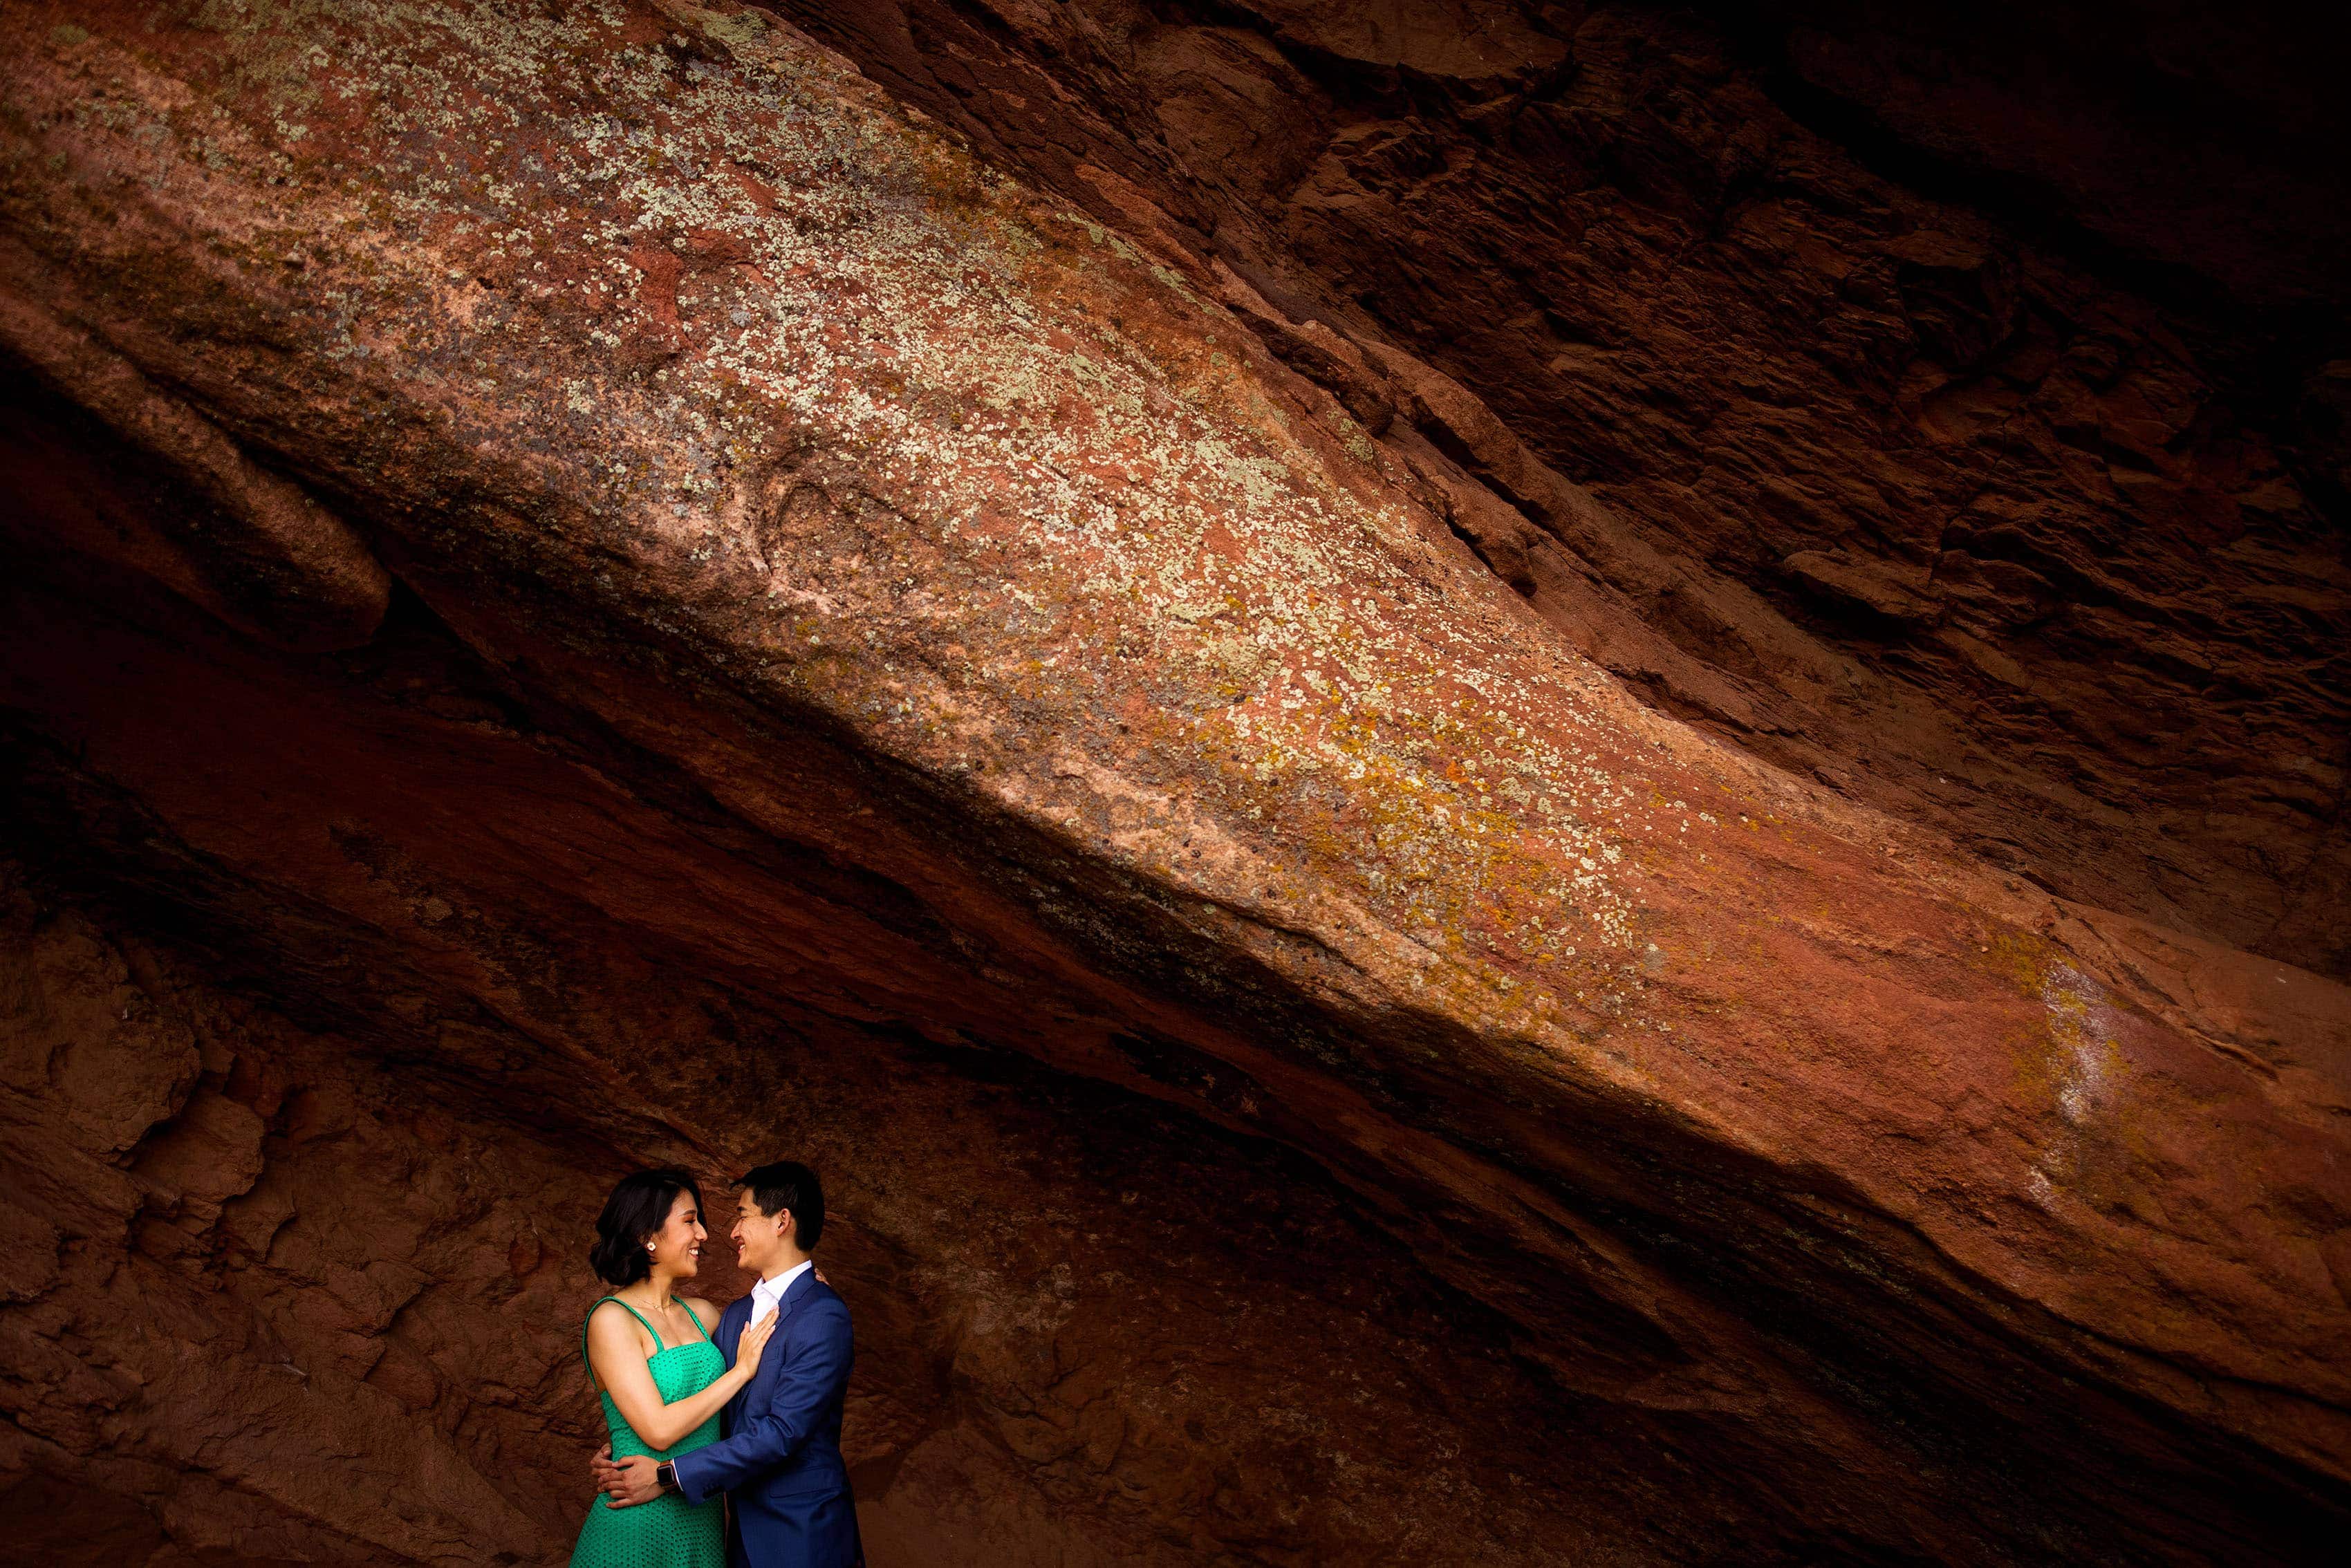 Yufan and Sunny embrace at Red Rocks amphitheatre during their engagement session